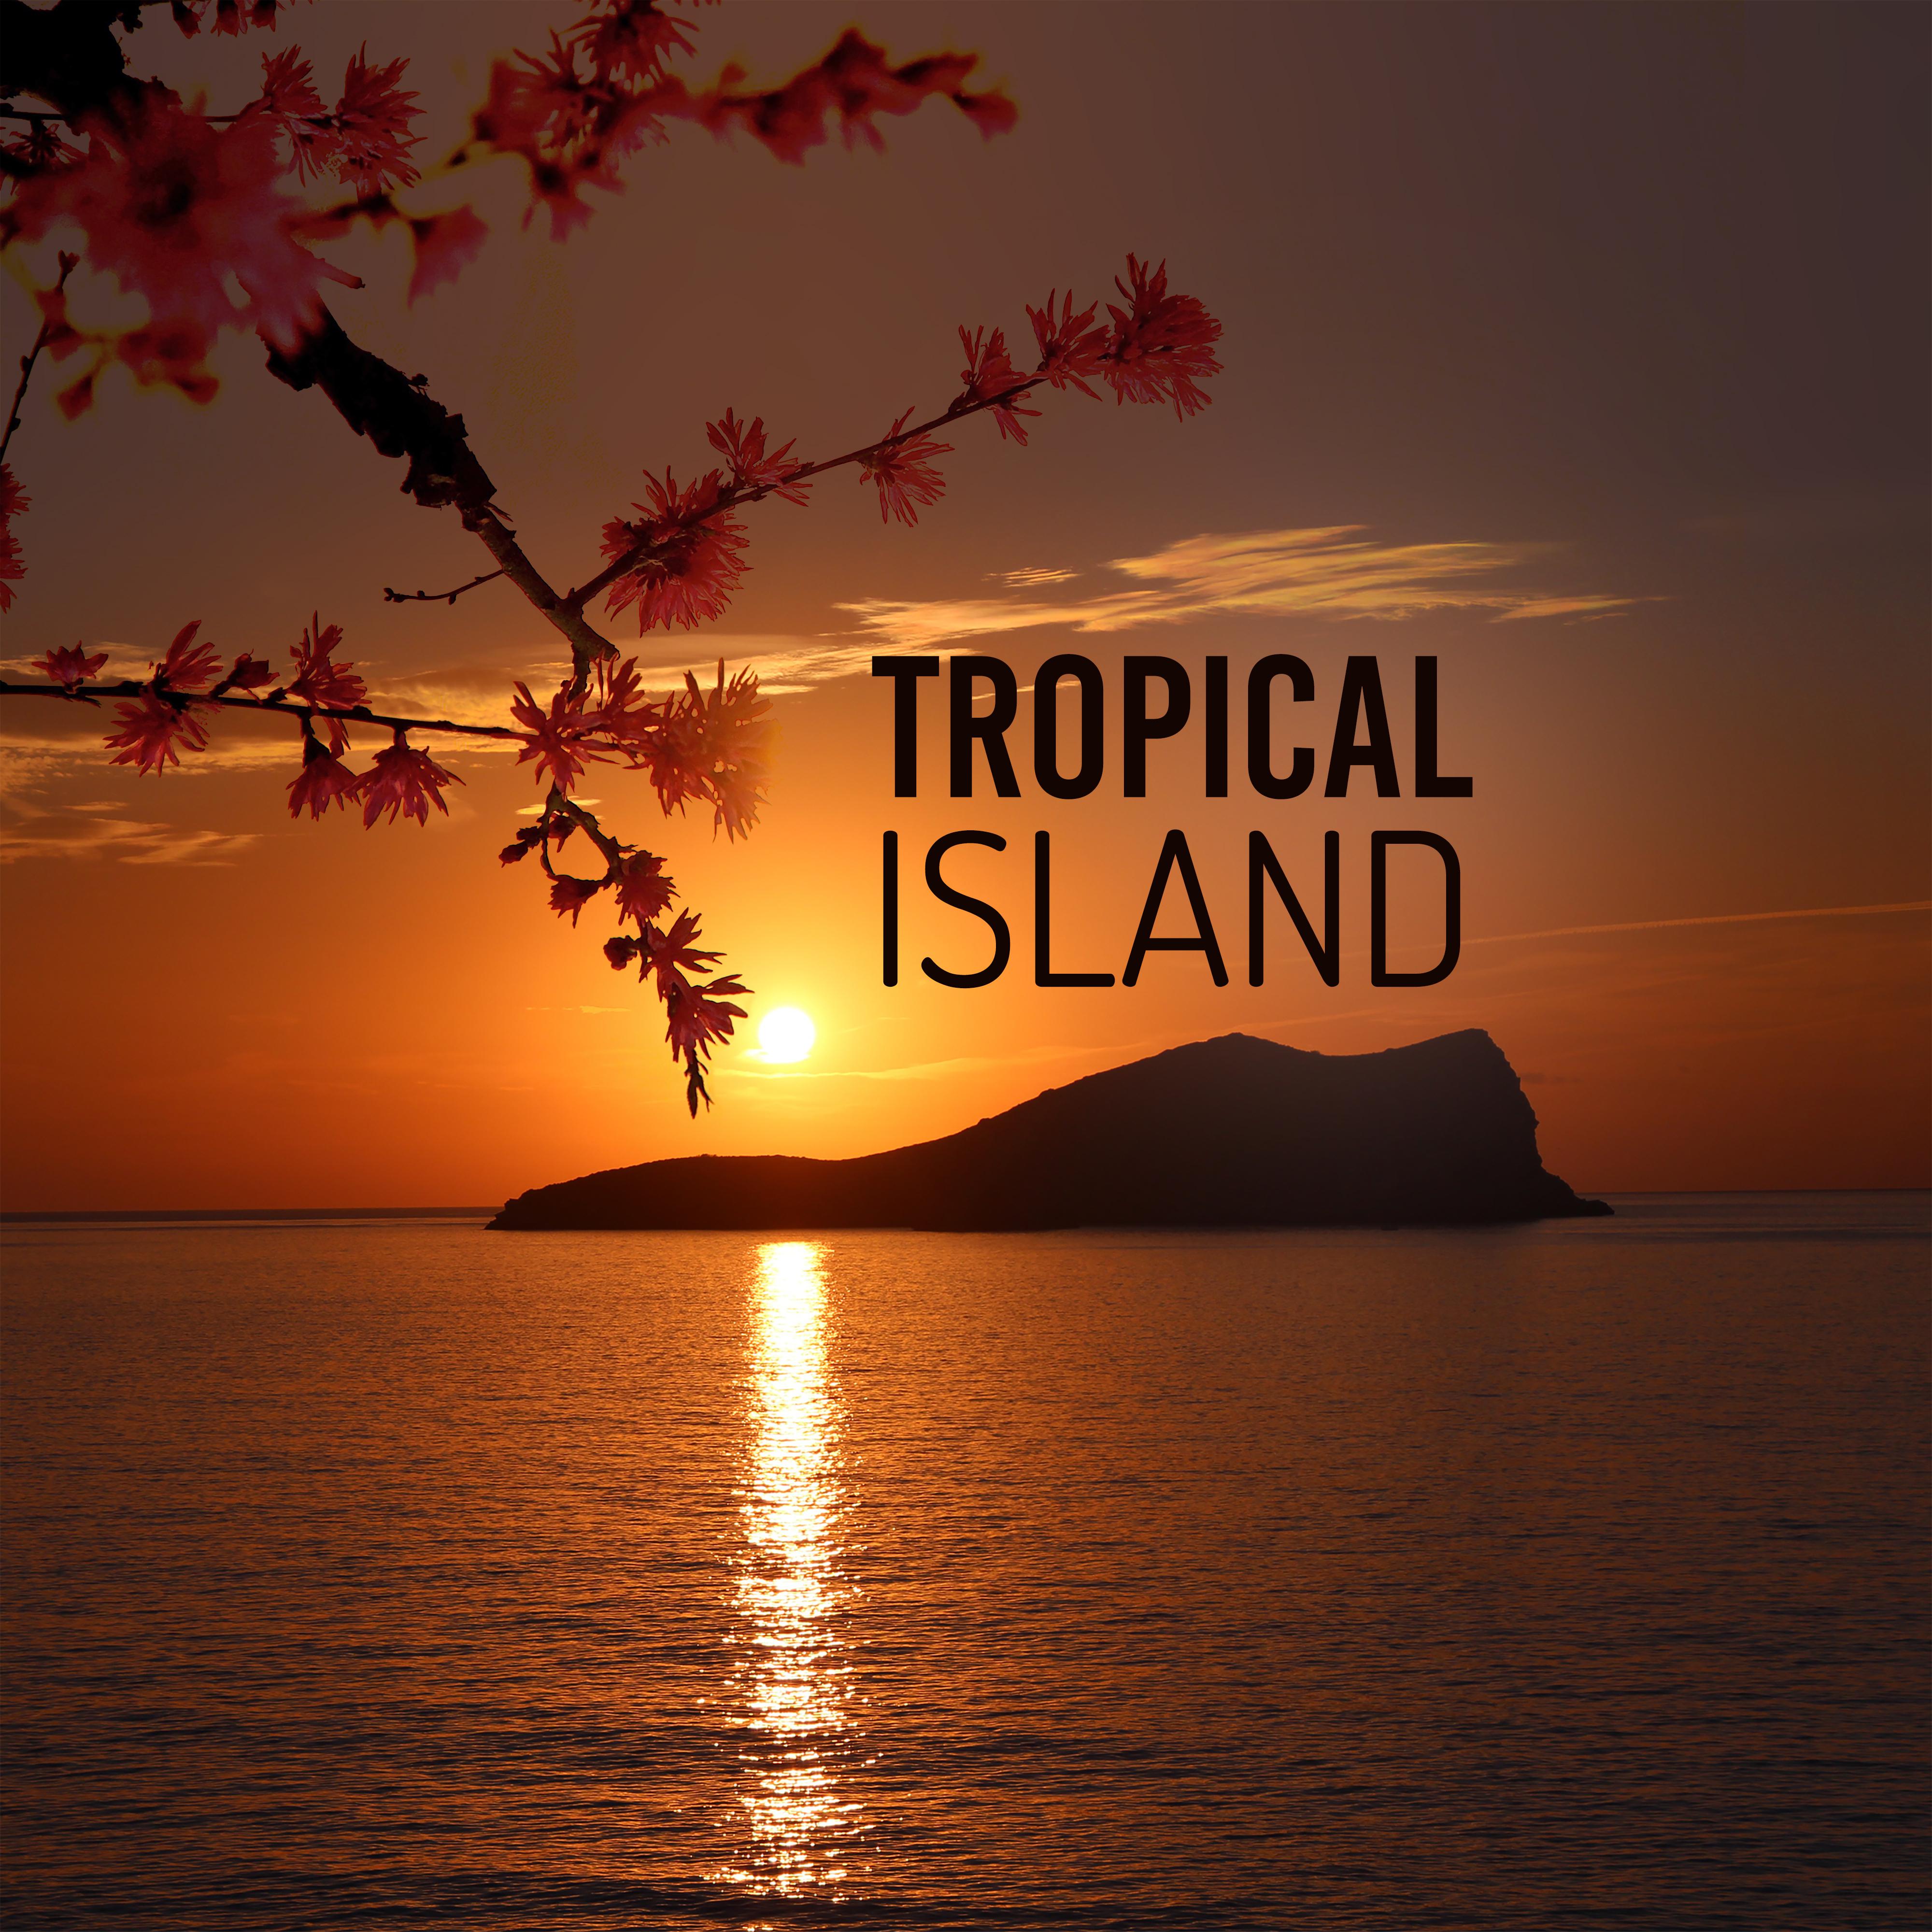 Tropical Island – Chill Out Music, Summertime Sounds, No More Stress, Holiday Relaxation